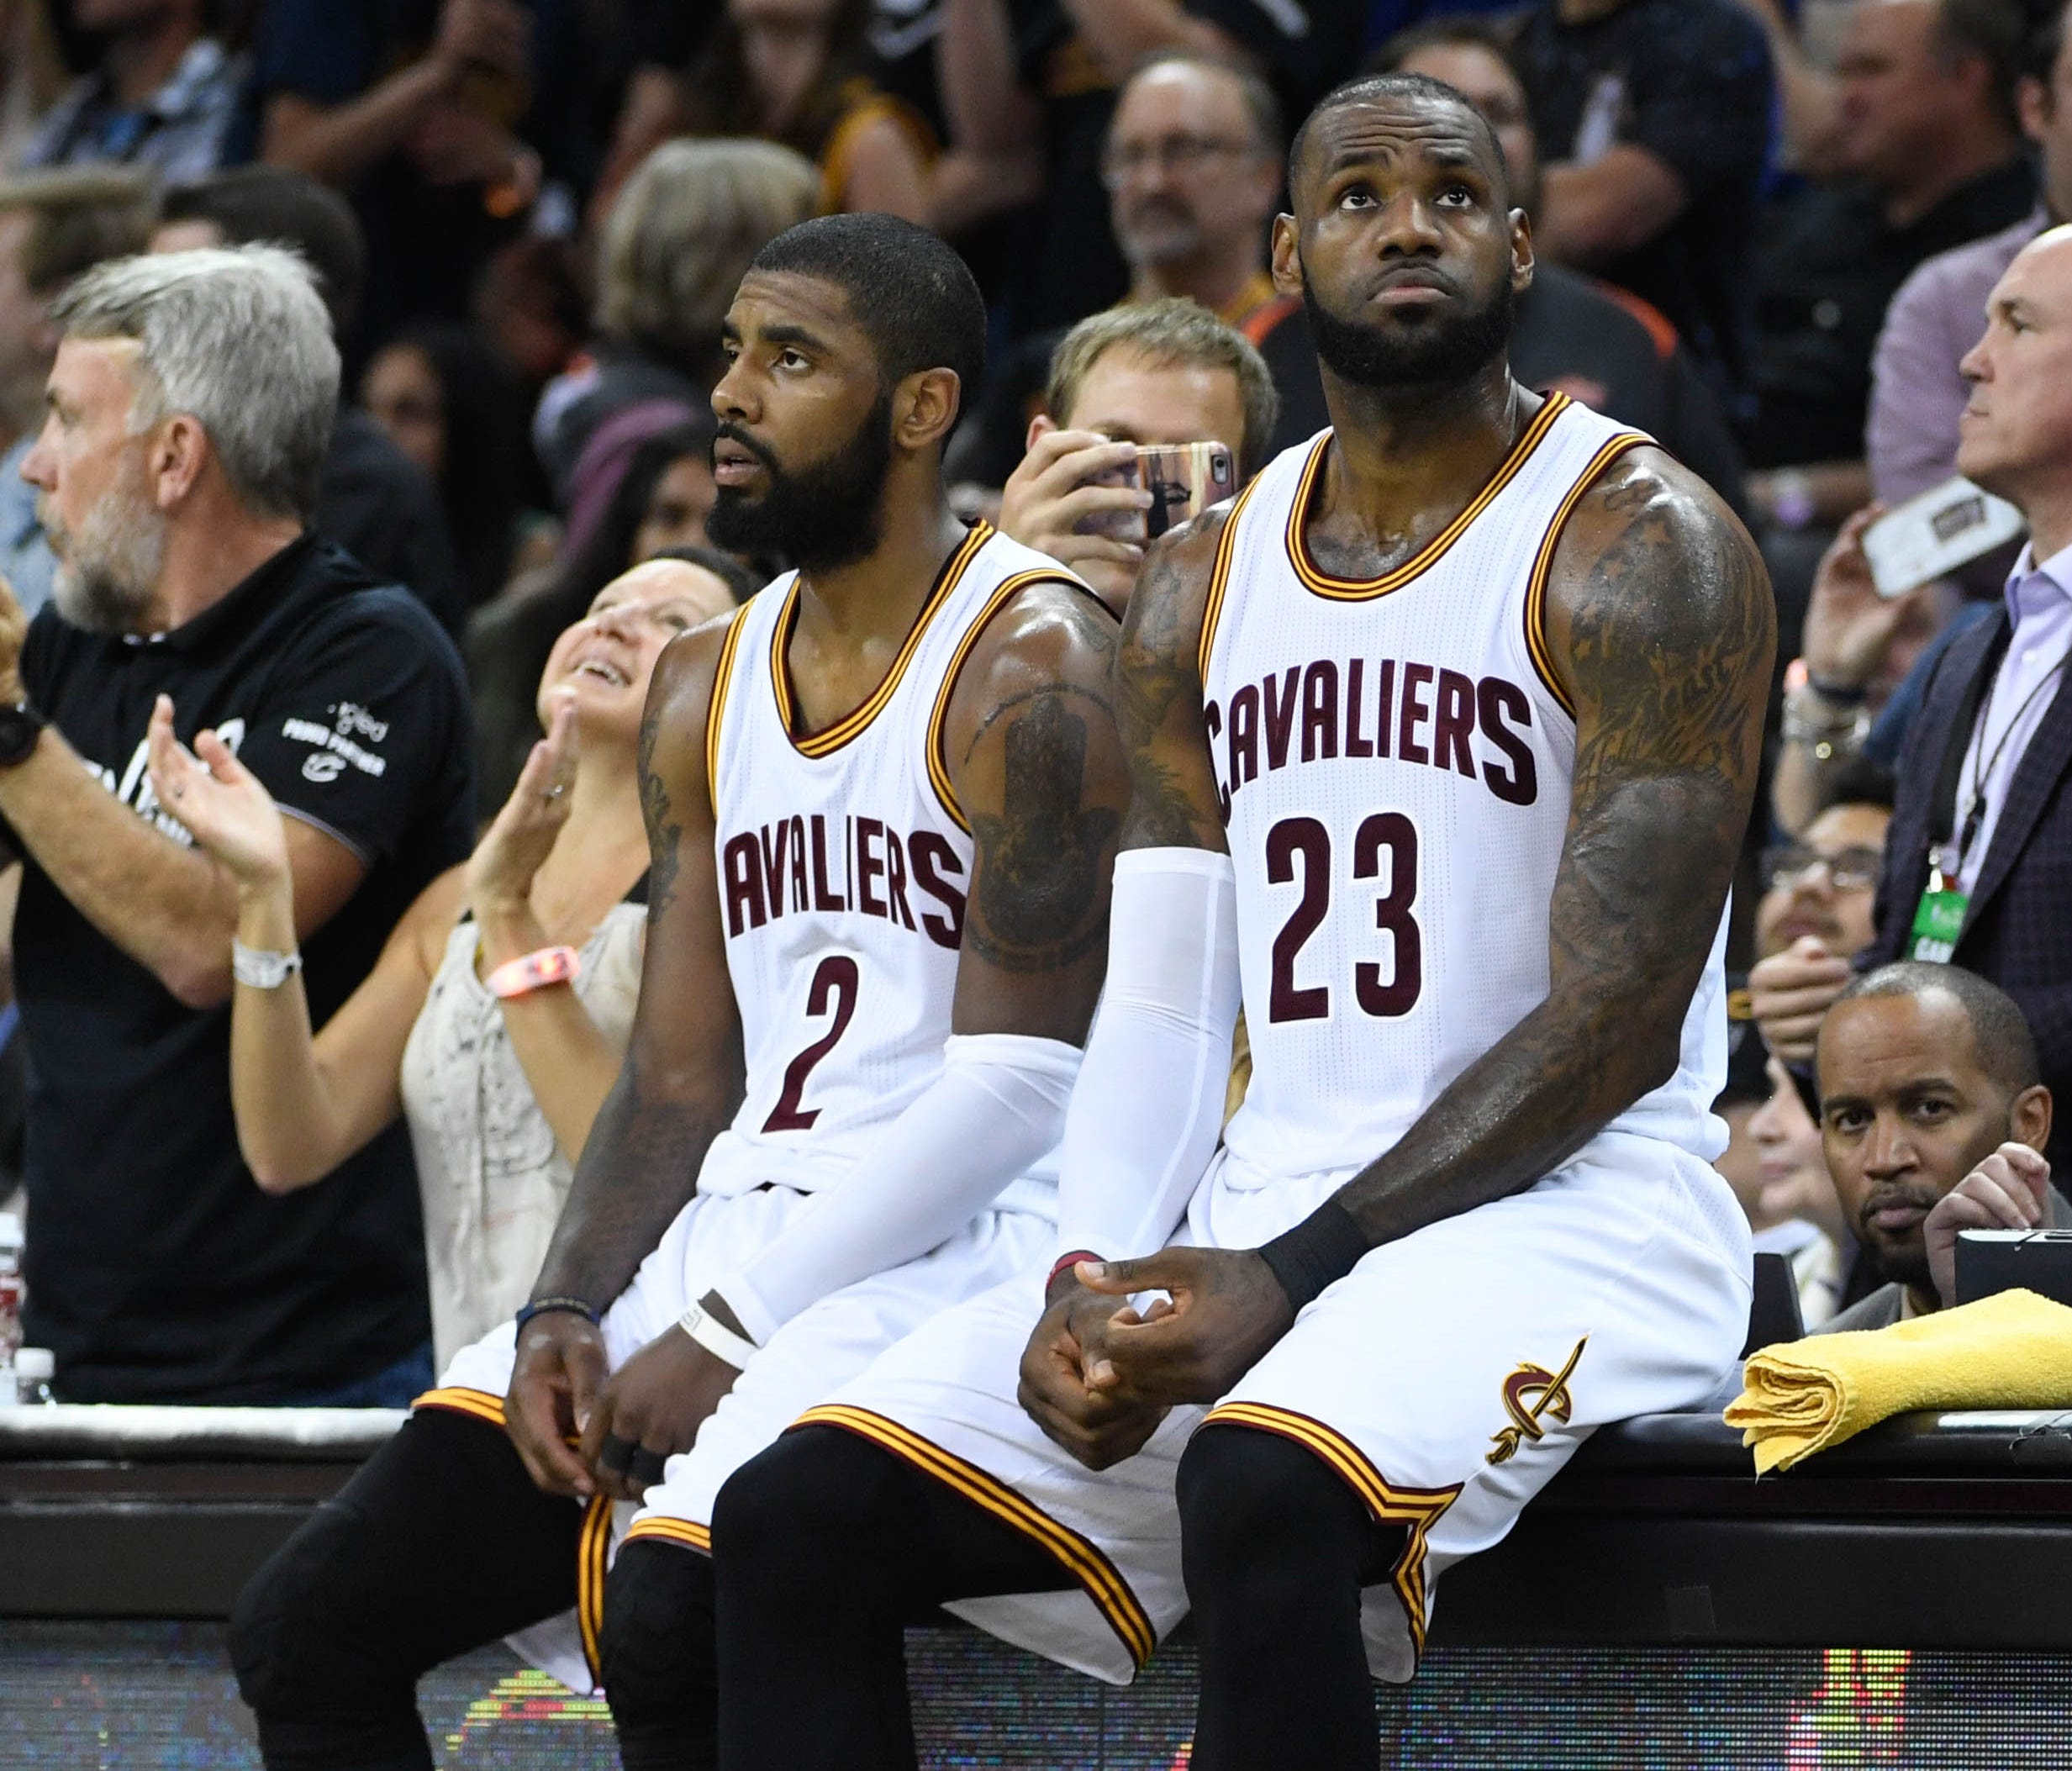 Kyrie Irving (2) and LeBron James (23) during the second quarter of Game 4 of the NBA Finals in June.